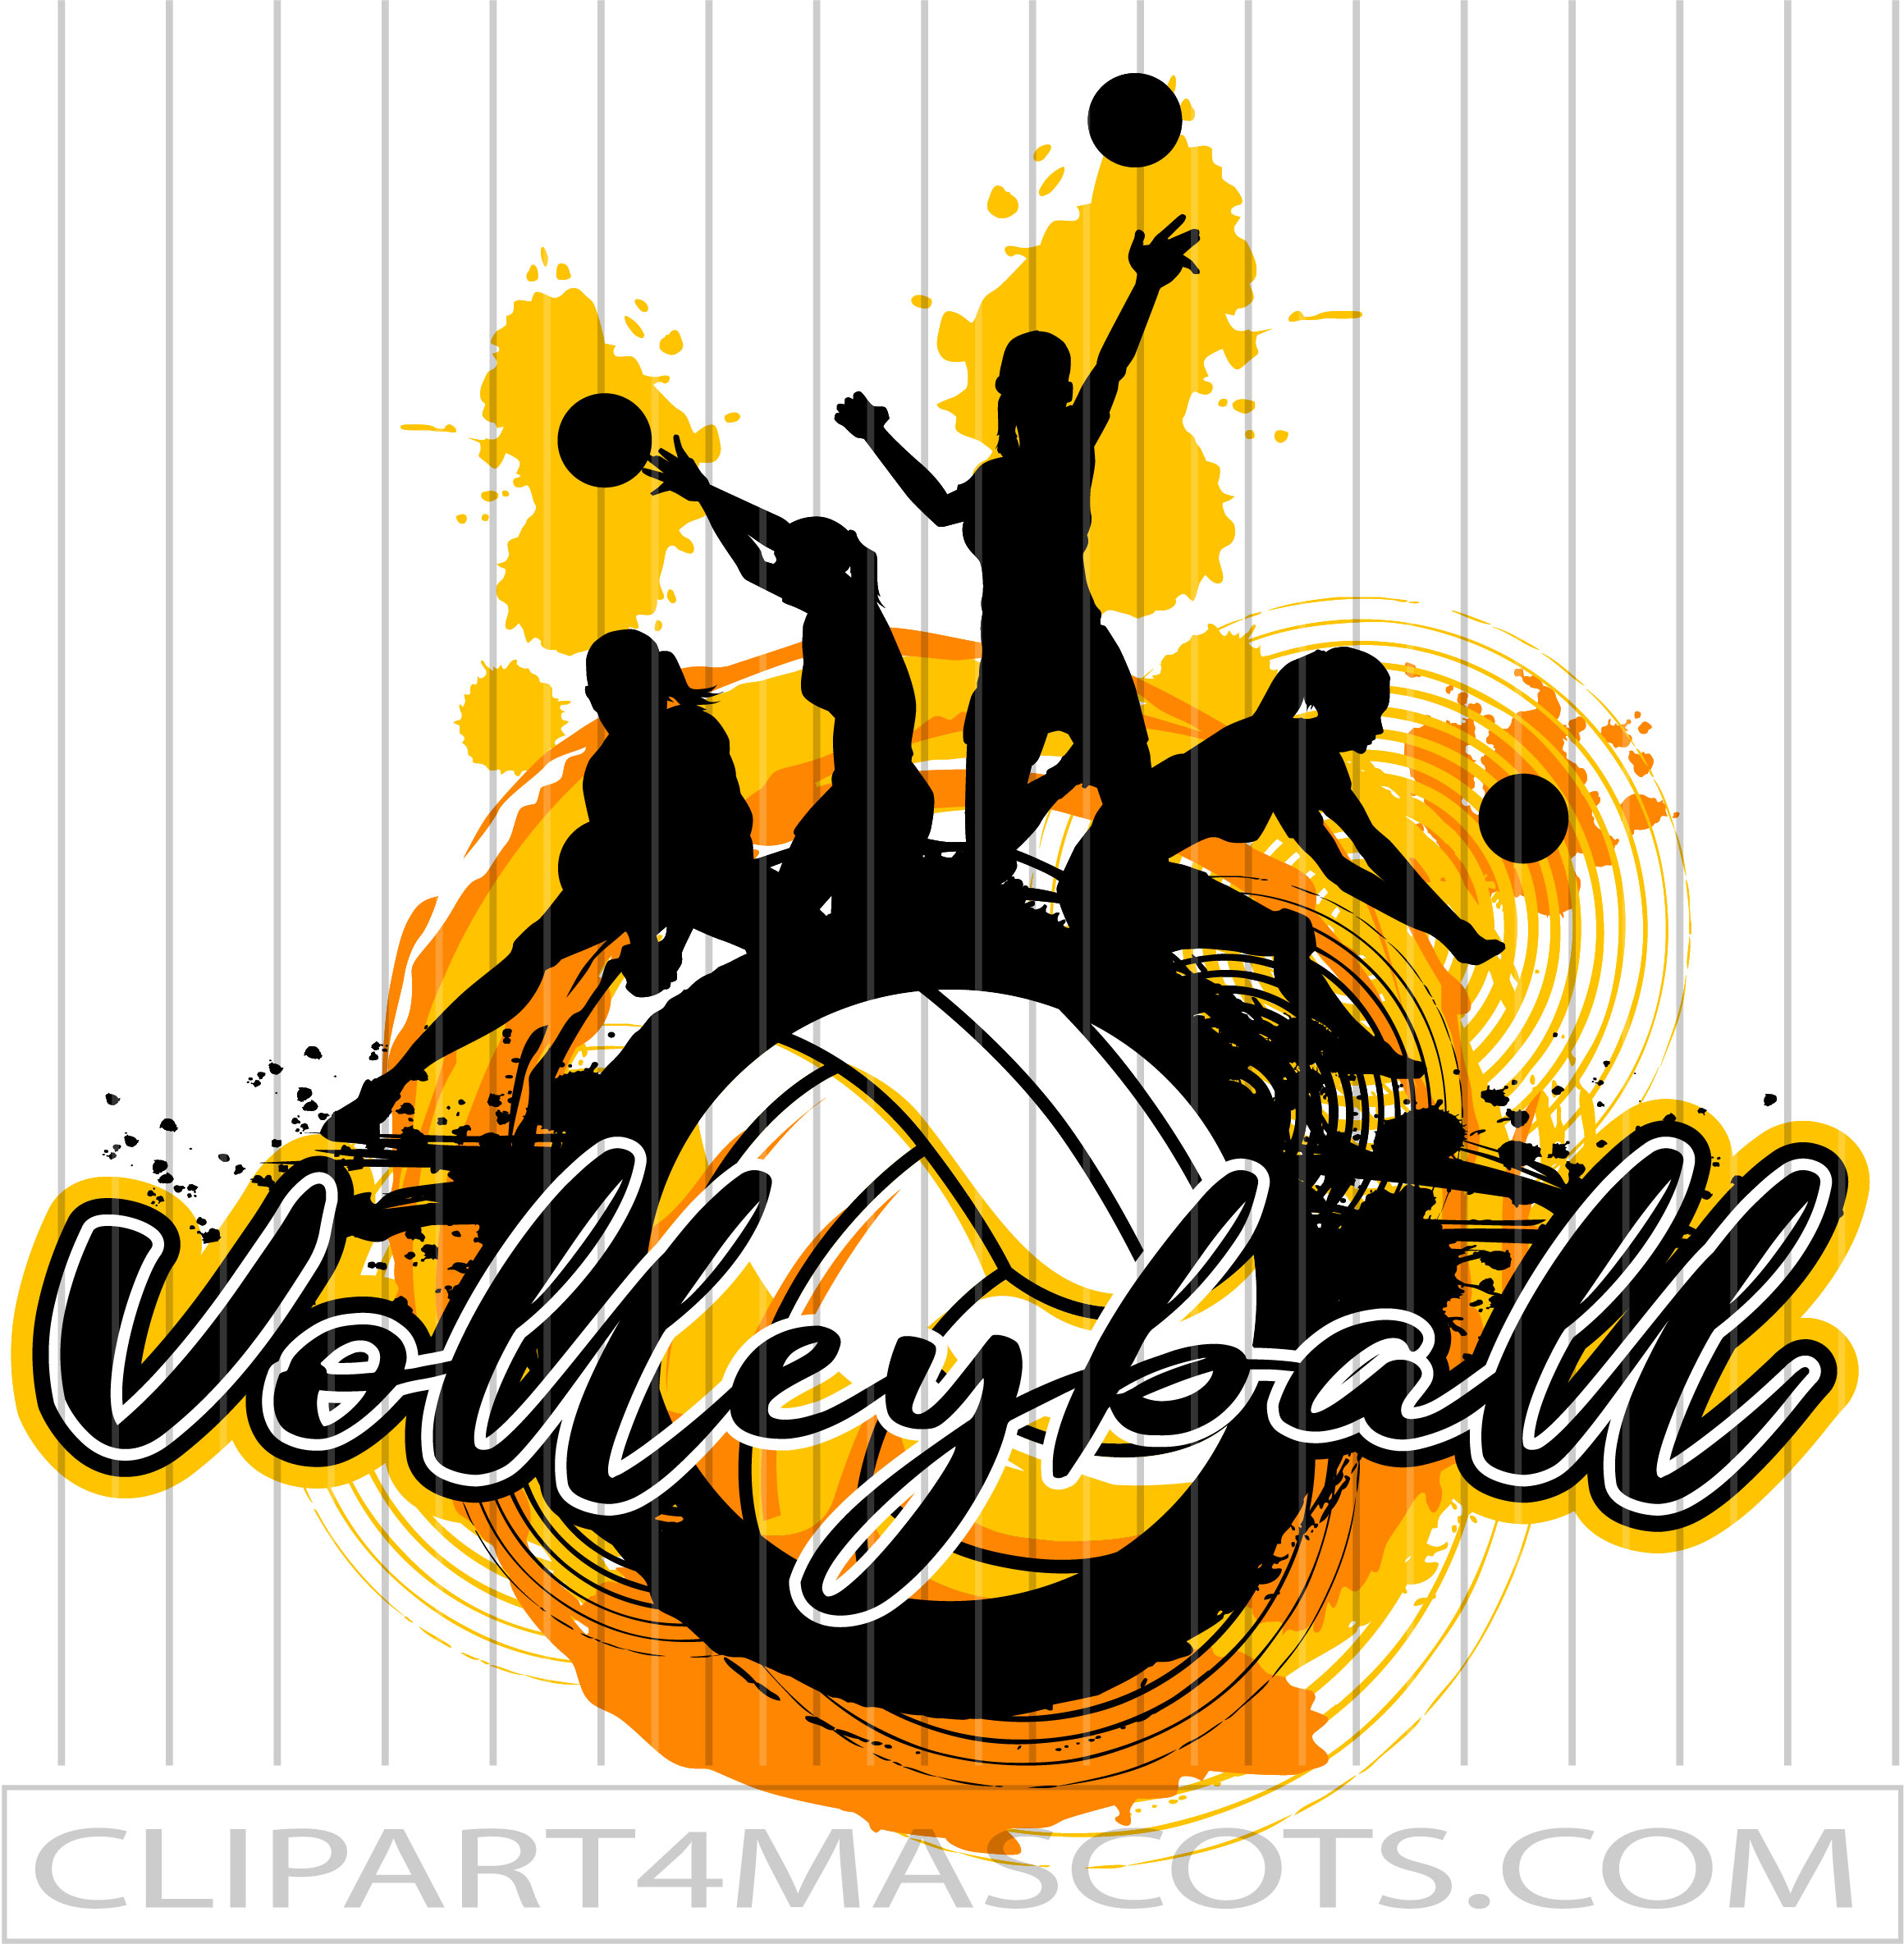 Female Volleyball Silhouettes | Vector Format | JPG EPS PNG AI